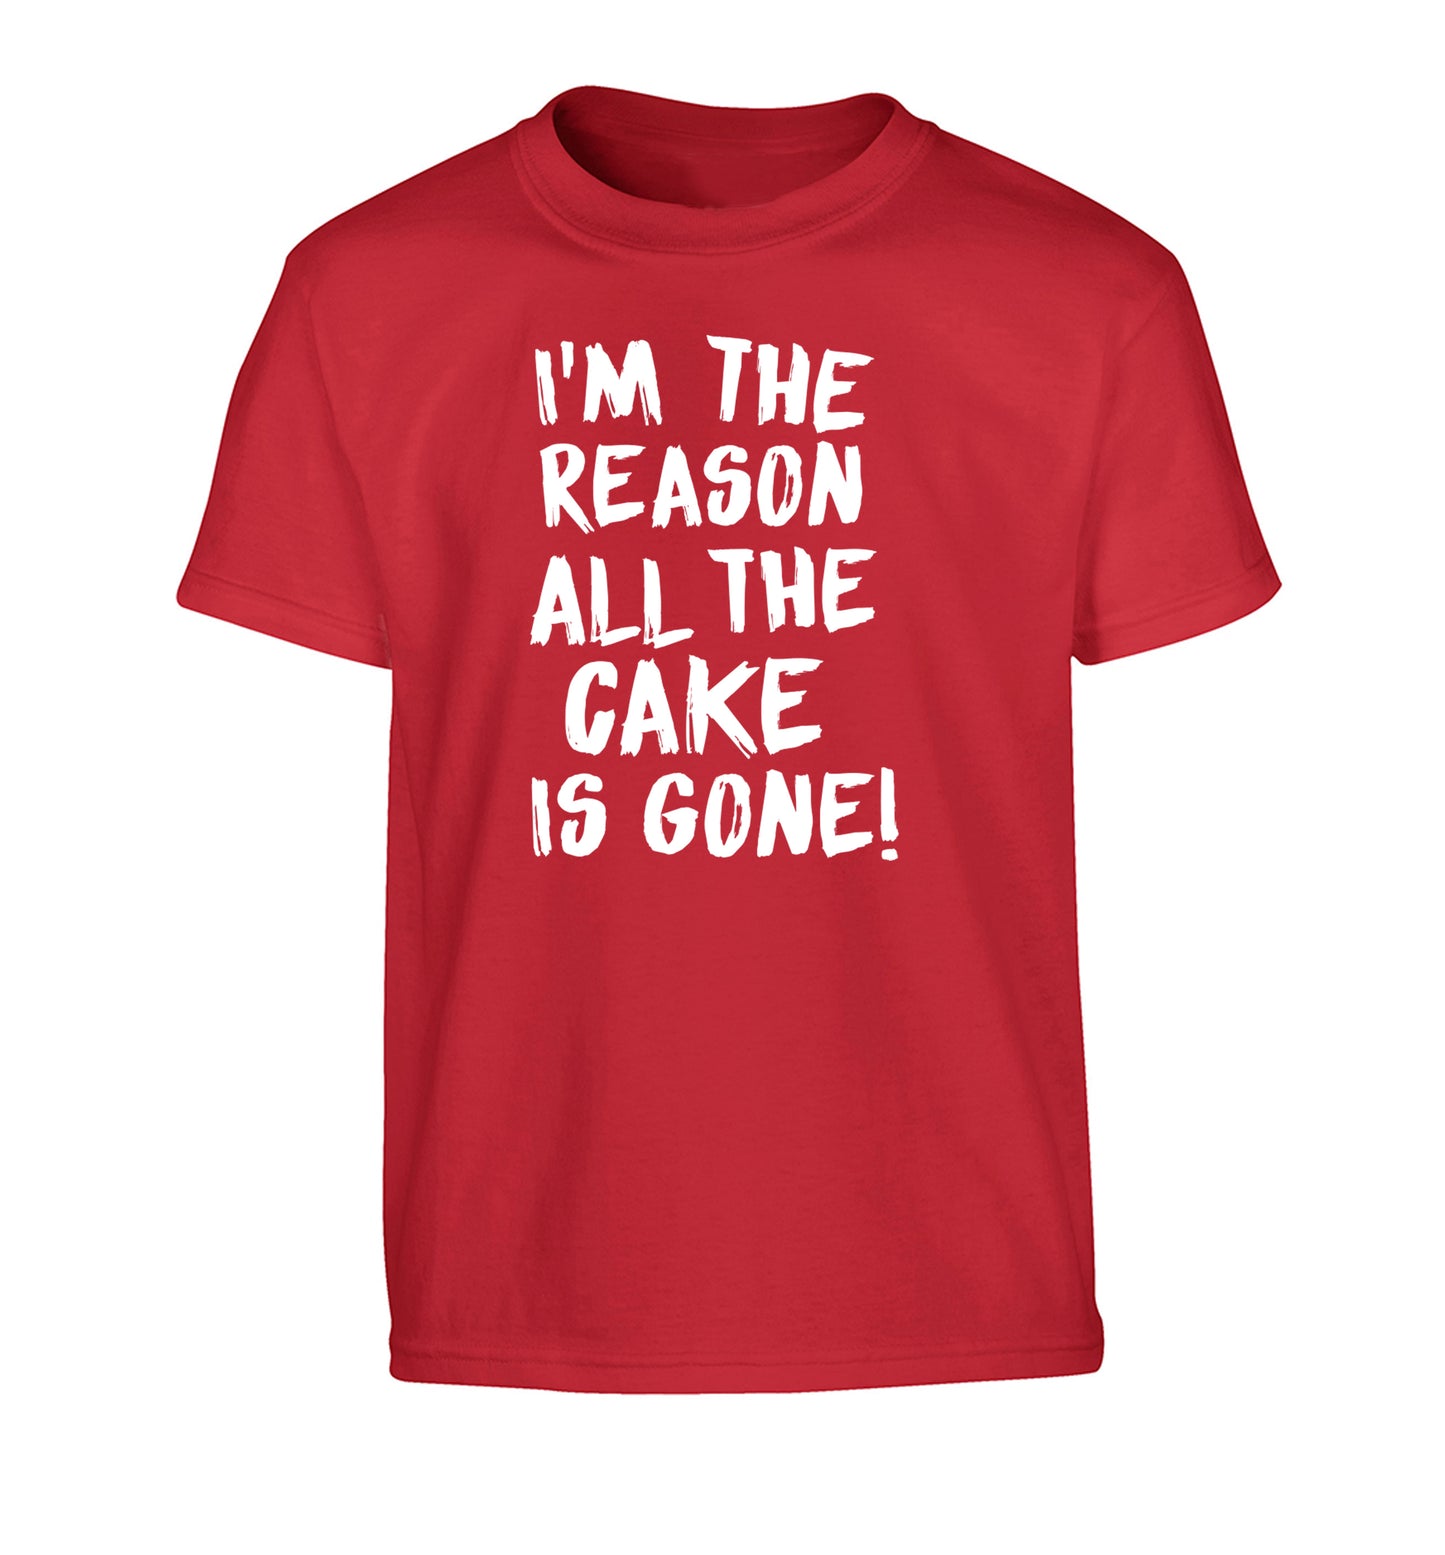 I'm the reason all the cake is gone Children's red Tshirt 12-13 Years